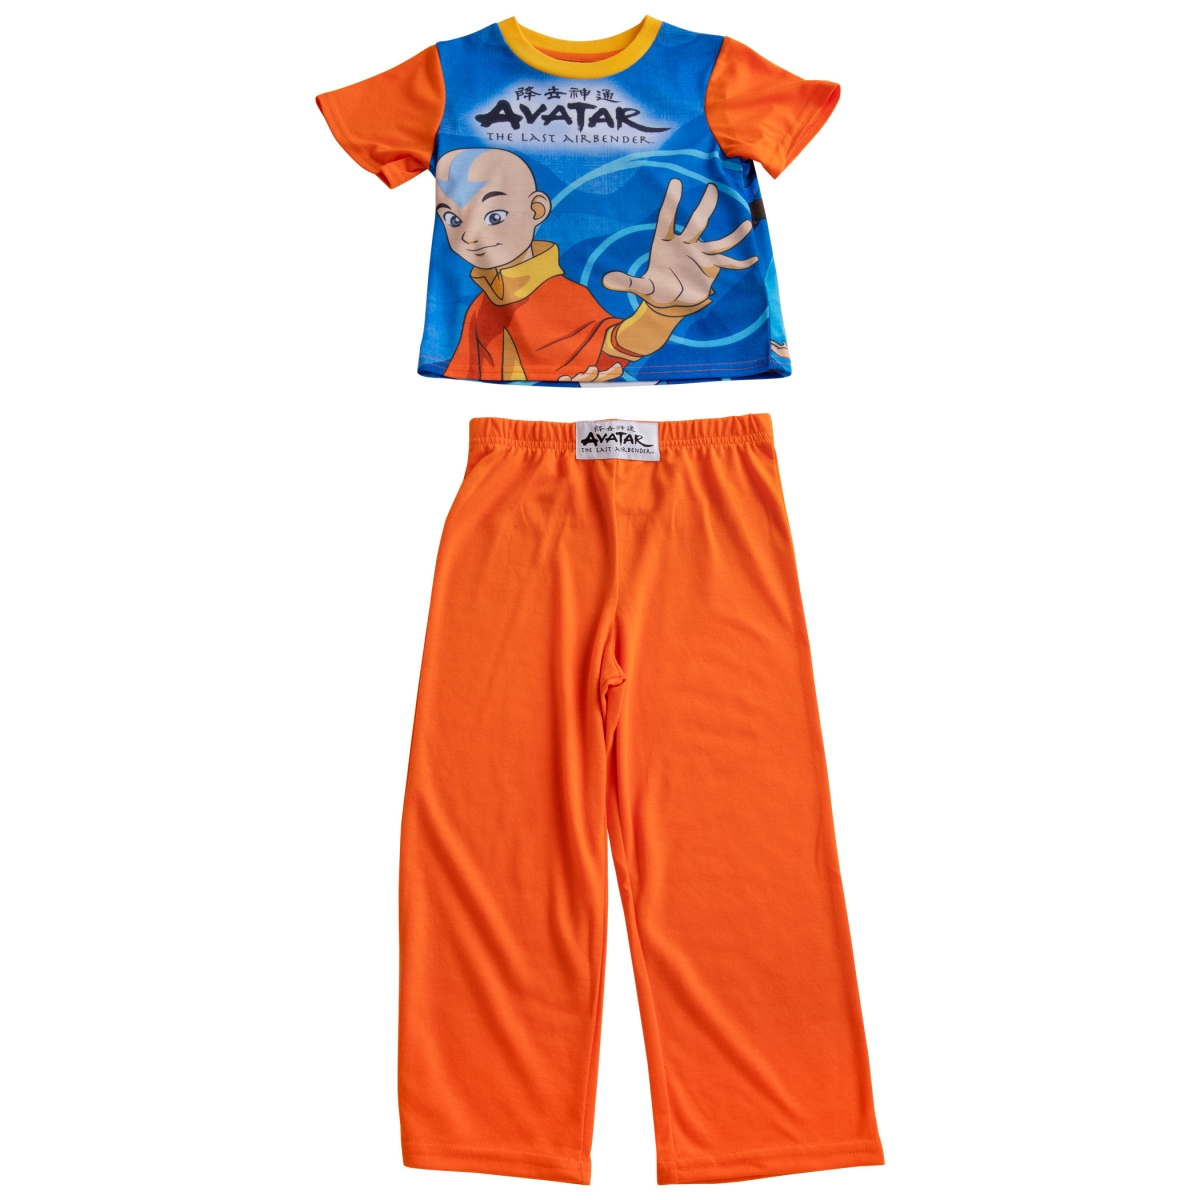 Picture of Avatar the Last Airbender 830415-size6 Avatar the Last Airbender Pajama Shirt & Pant Set - Size 6